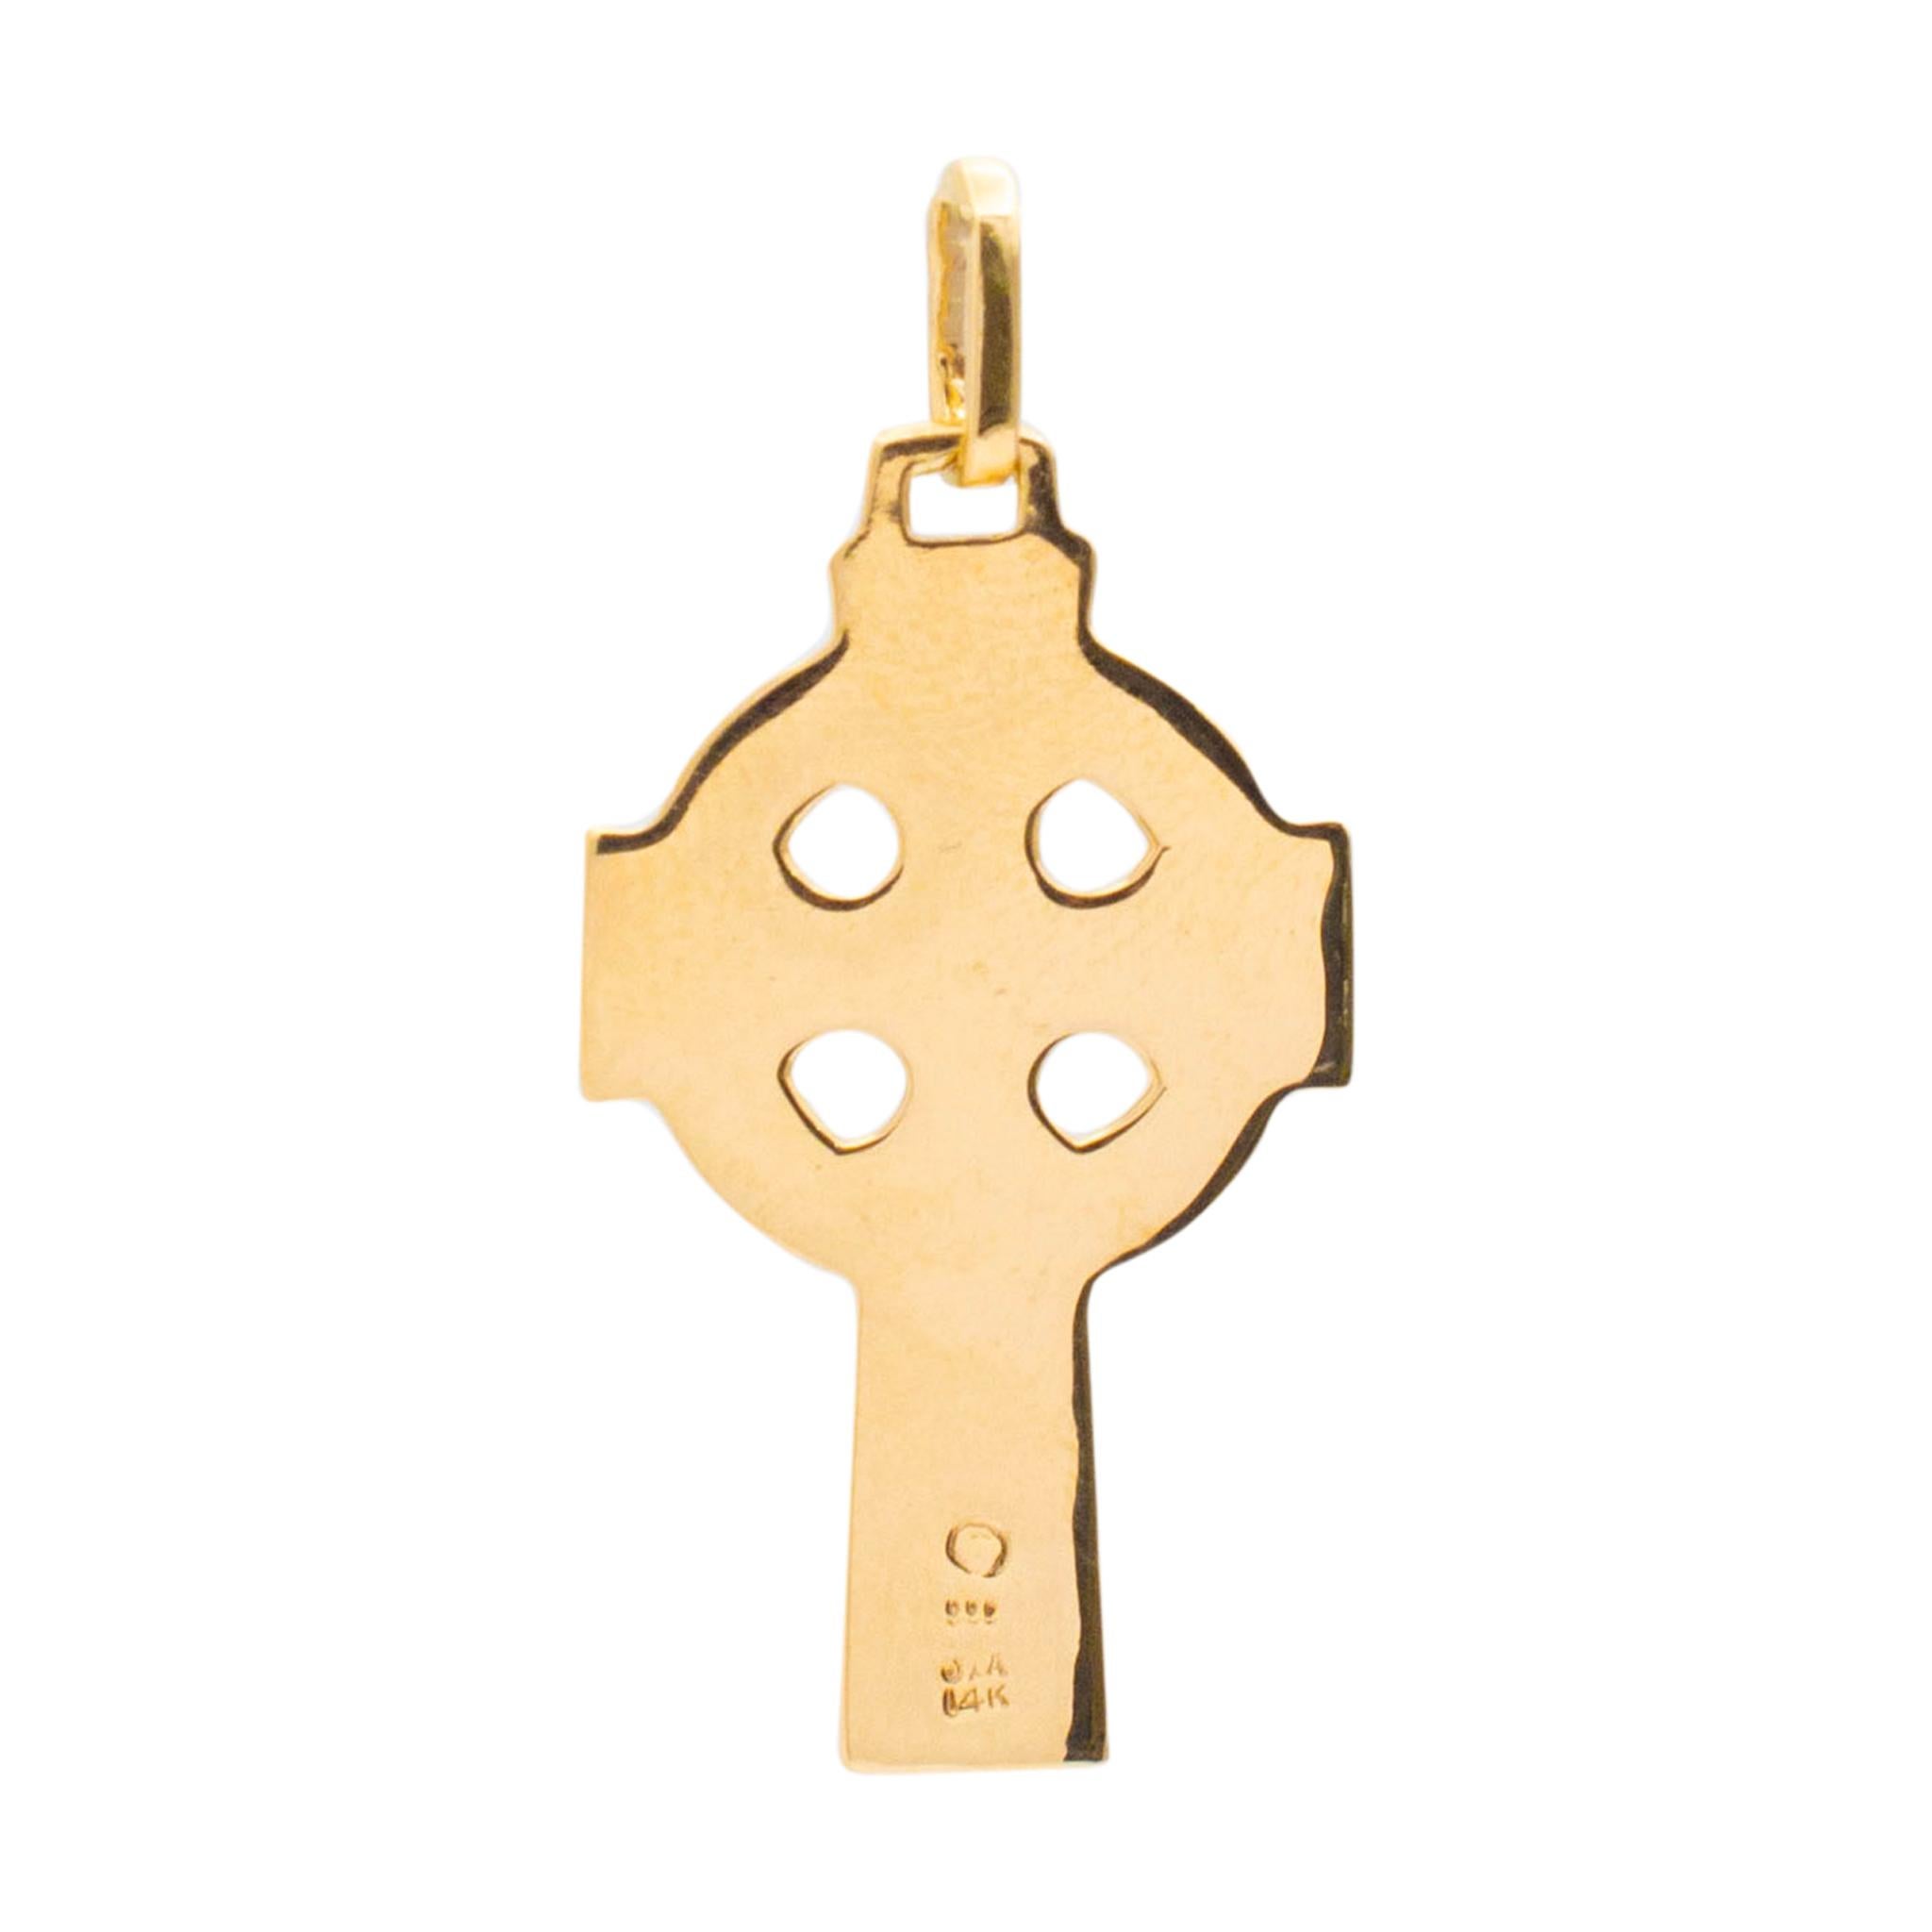 Brand: James Avery

Gender: Unisex

Metal Type: 14K Yellow Gold

Length: 36.00 mm

Width: 18.00 mm

Weight: 5.20 grams
JAMES AVERY 14K yellow gold religious cross pendant. Engraved with 